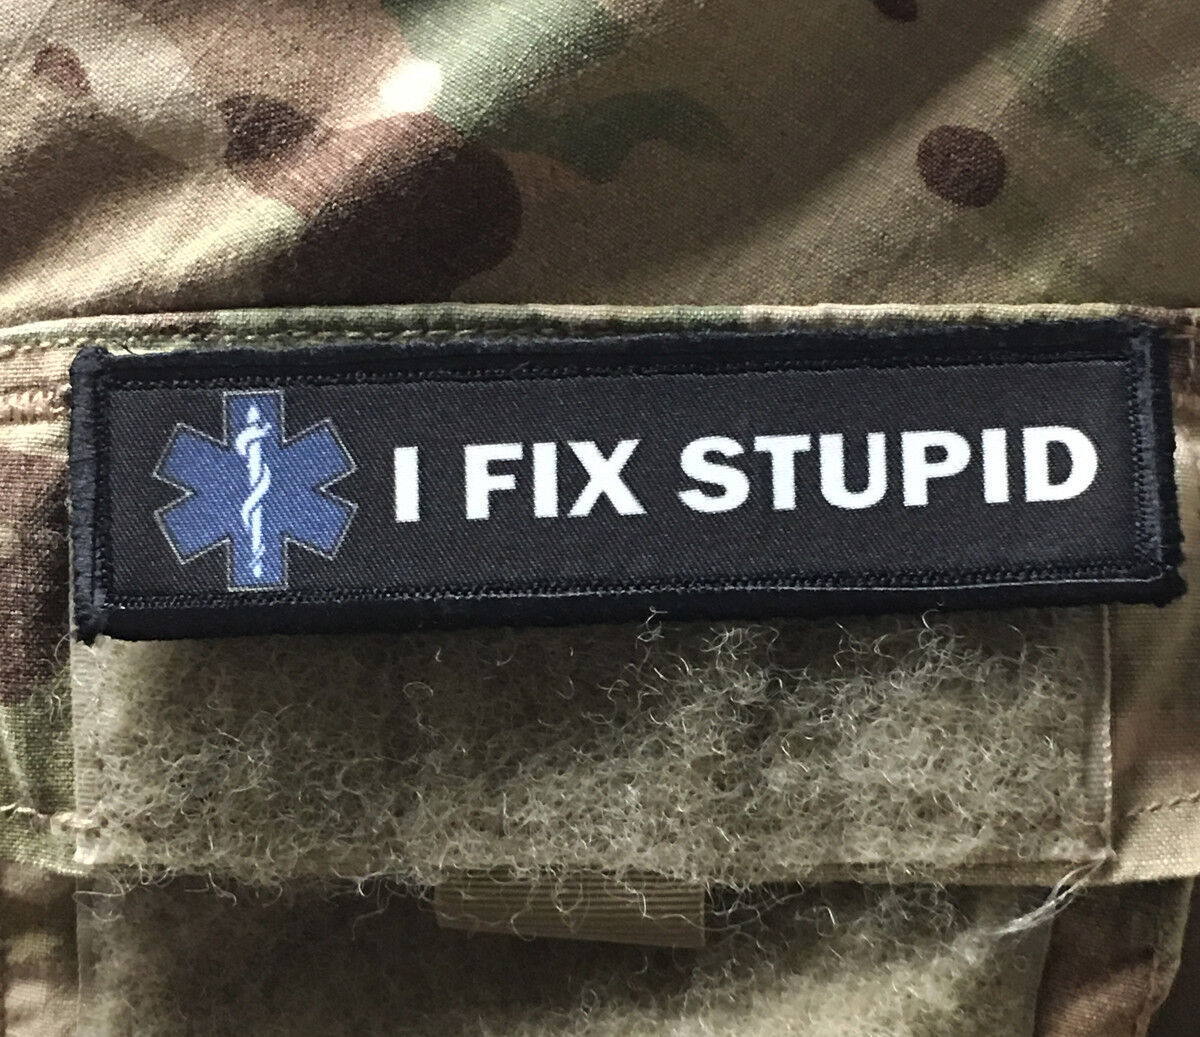 1x4 EMT Medic I FIX STUPID Morale Patch Tactical Military Army Hook Badge USA